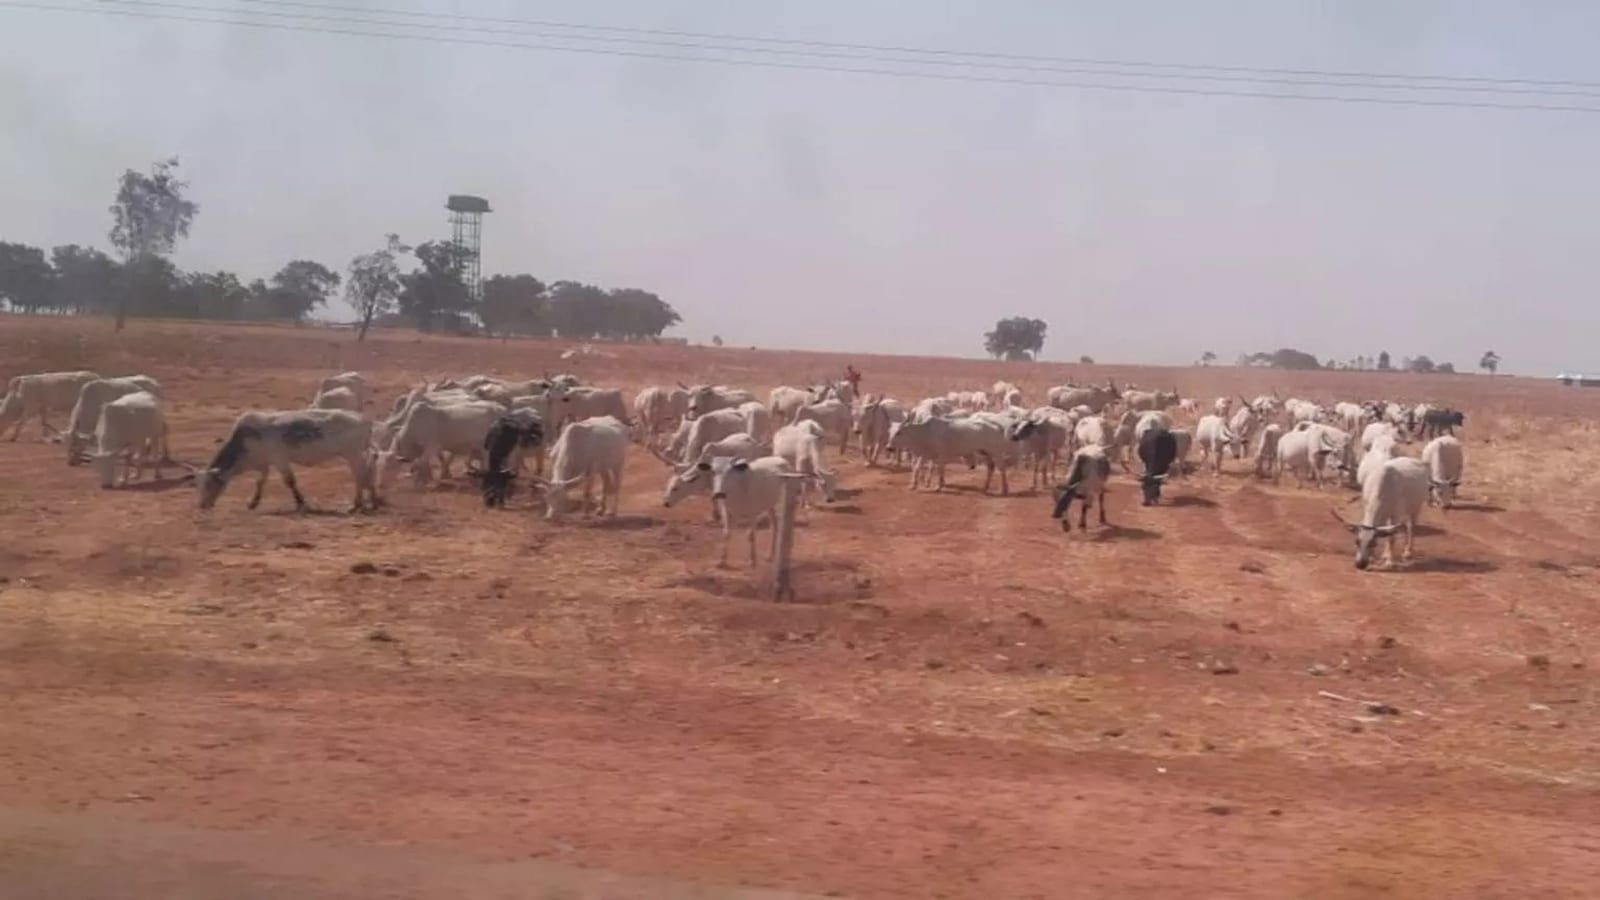 Ghana to allocate 150,000 hectares for grazing reserves to curb herd conflicts